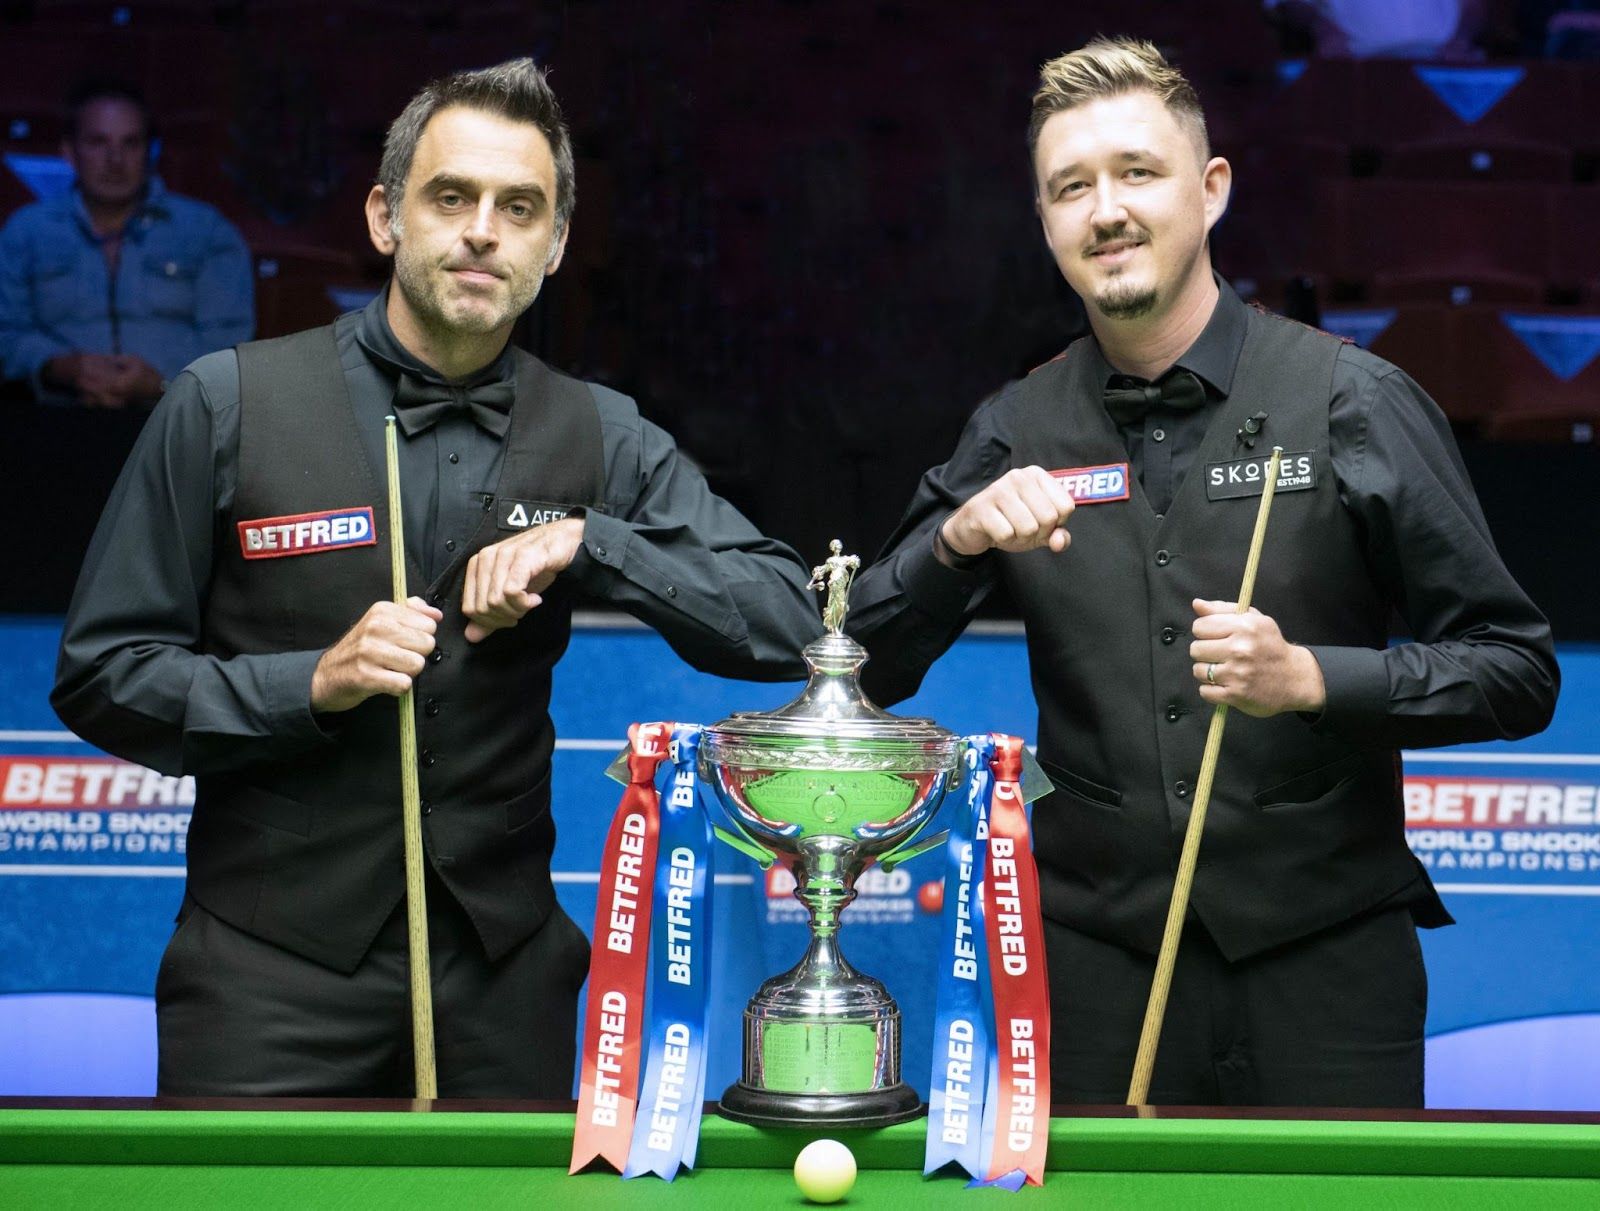 World Snooker Championship 2022 Where is it held, Who is Participate and What to expect From World Snooker Championship